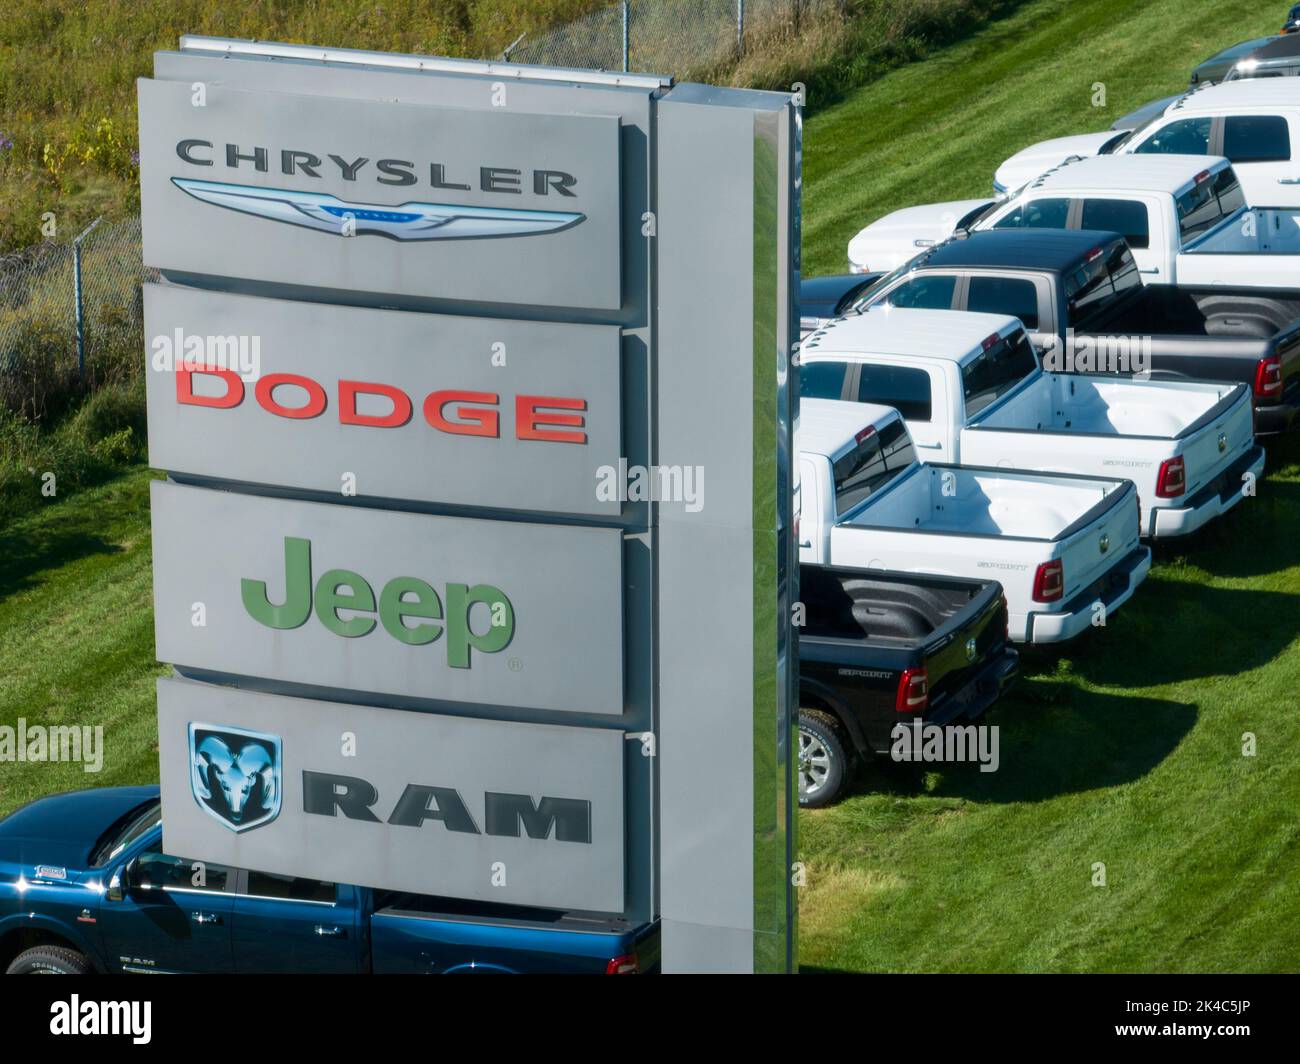 A sign with the Chrysler, Dodge, Jeep and RAM logos on into, out from a large car dealership selling the popular Stellantis brands. Stock Photo